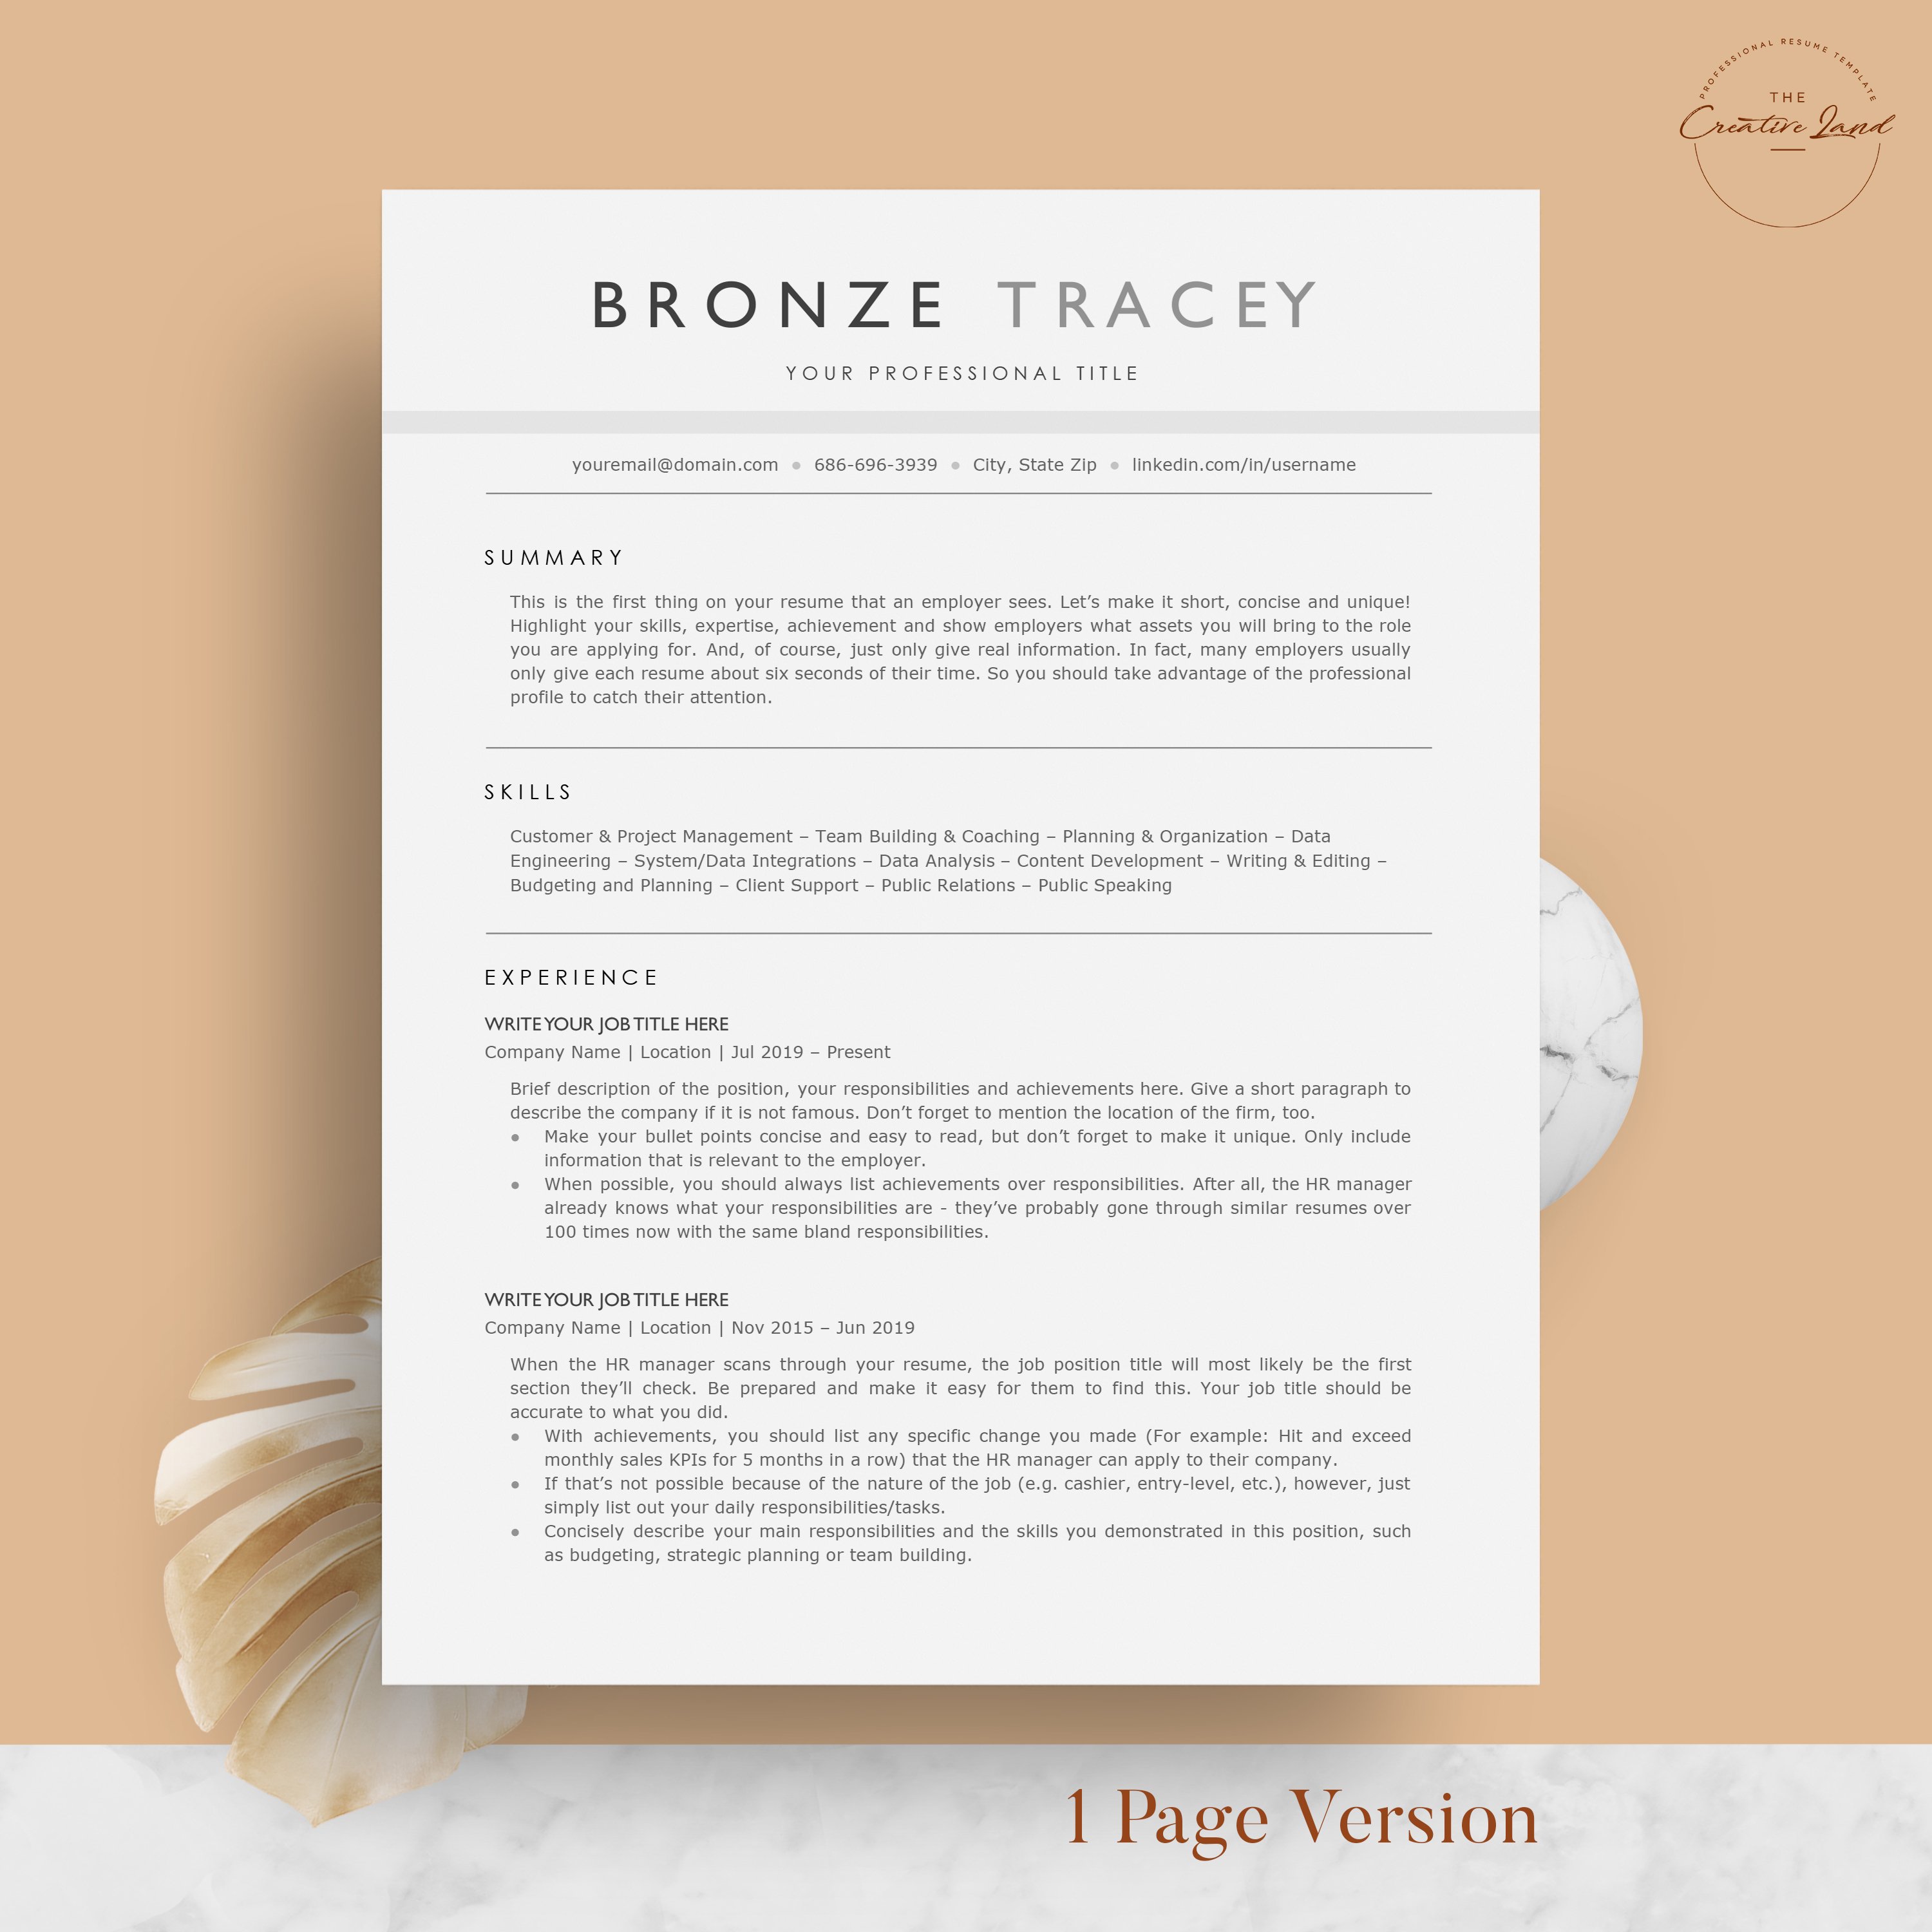 Clean ATS Resume/CV - The Bronze preview image.